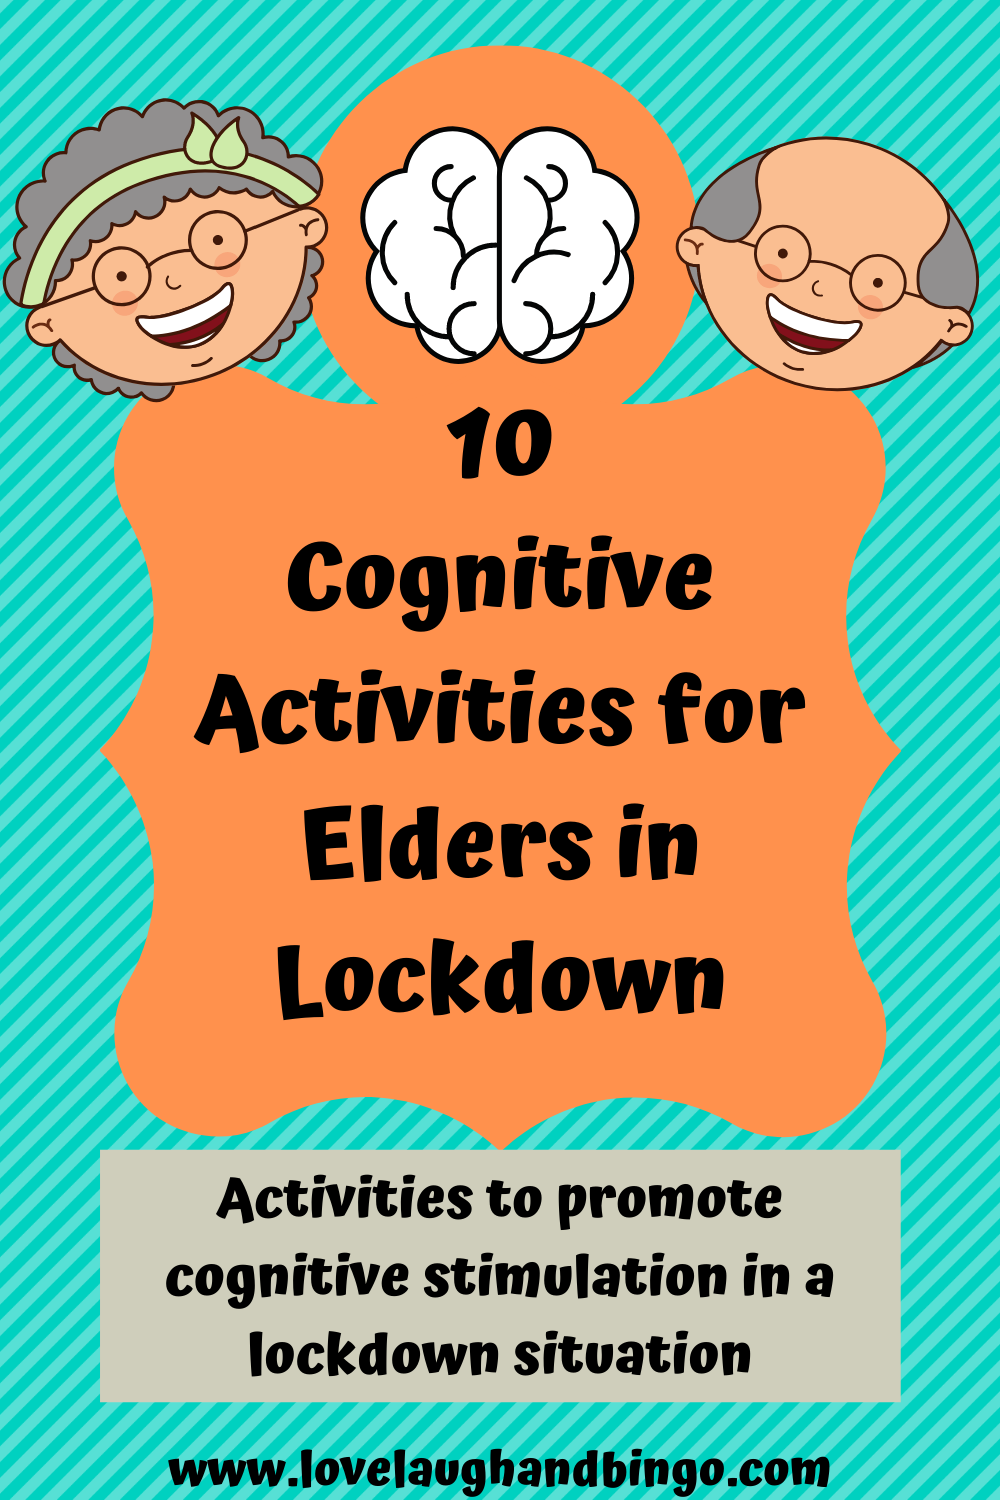 10+ Cognitive Activities To Keep Elderly Mentally Stimulated During ...